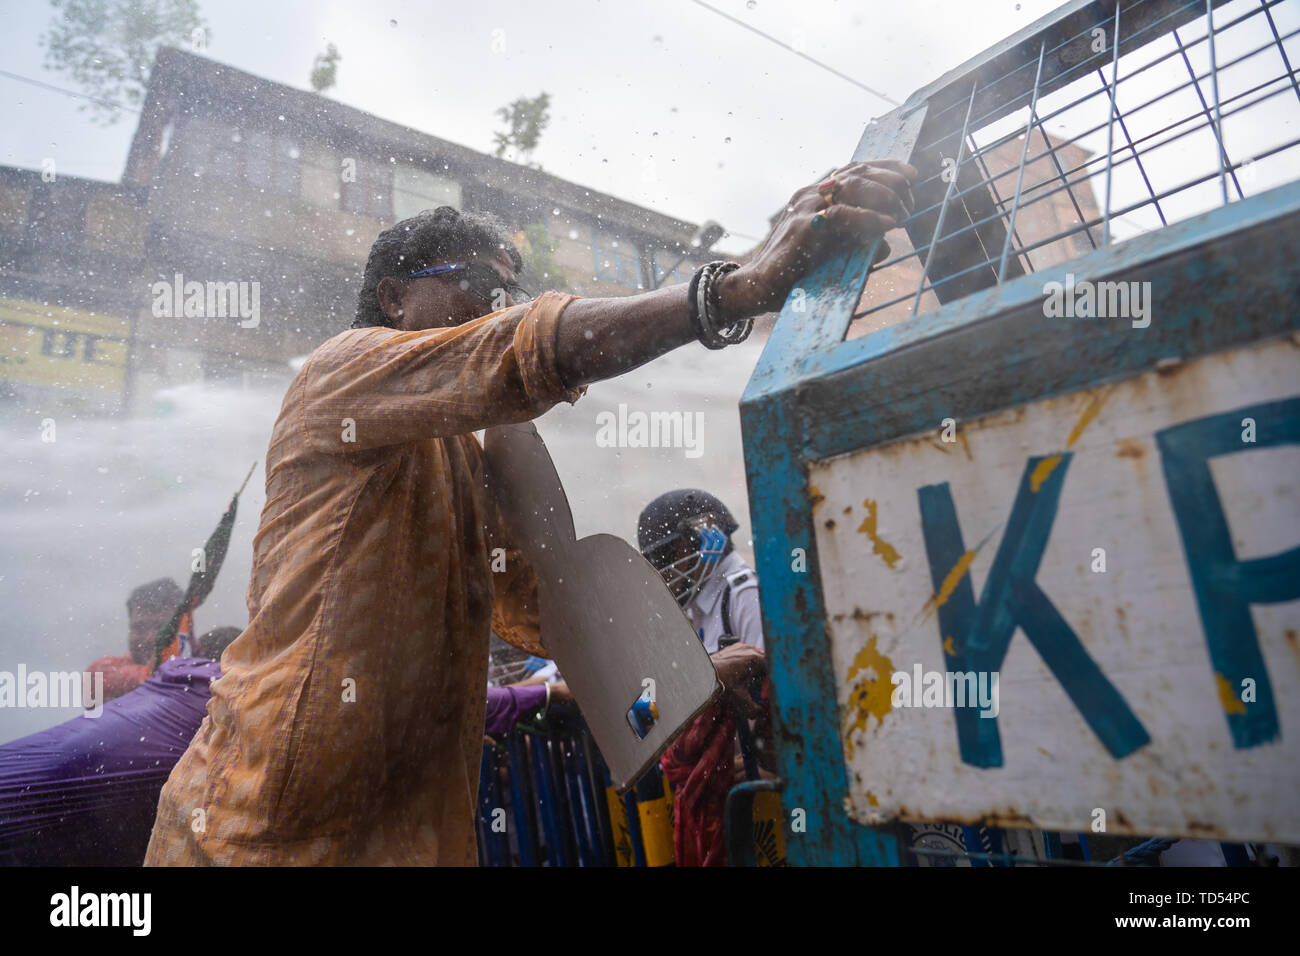 Kolkata, India. 12th June, 2019. Kolkata, India. 12th June, 2019. A Bharatiya Janata Party (BJP) supporter attempts to break through a police barricade amidst water cannons during the protest in Kolkata. Bharatiya Janata Party workers protest against the killings of the BJP workers and also highlighting the alleged deterioration of law and order in the state, the Police used water cannons and tear gas shells towards the protesters who held a rally at Kolkata Police headquarters. Credit: SOPA Images Limited/Alamy Live News Stock Photo